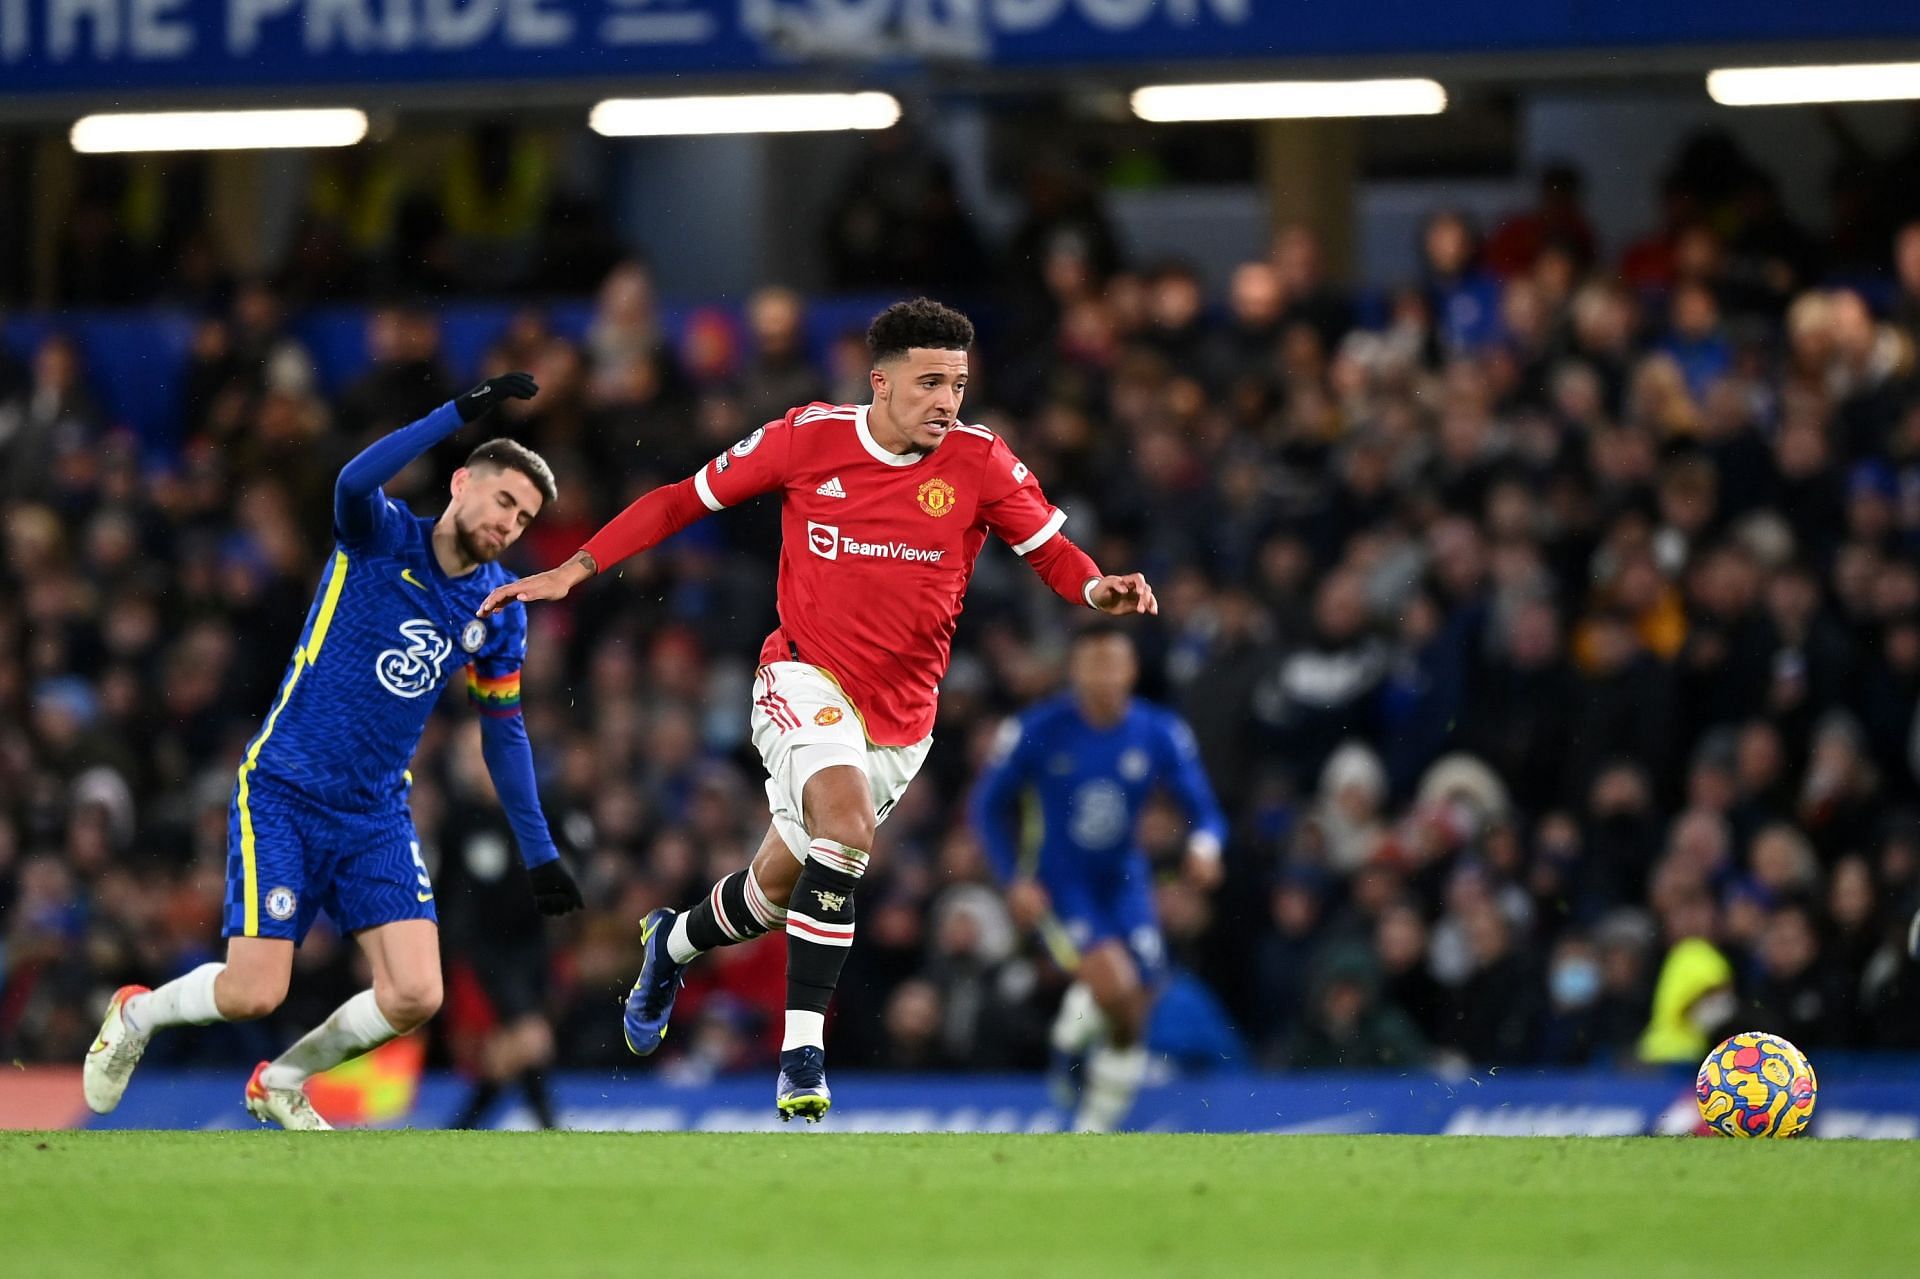 The Blues could only manage a draw despite dominating against Manchester United